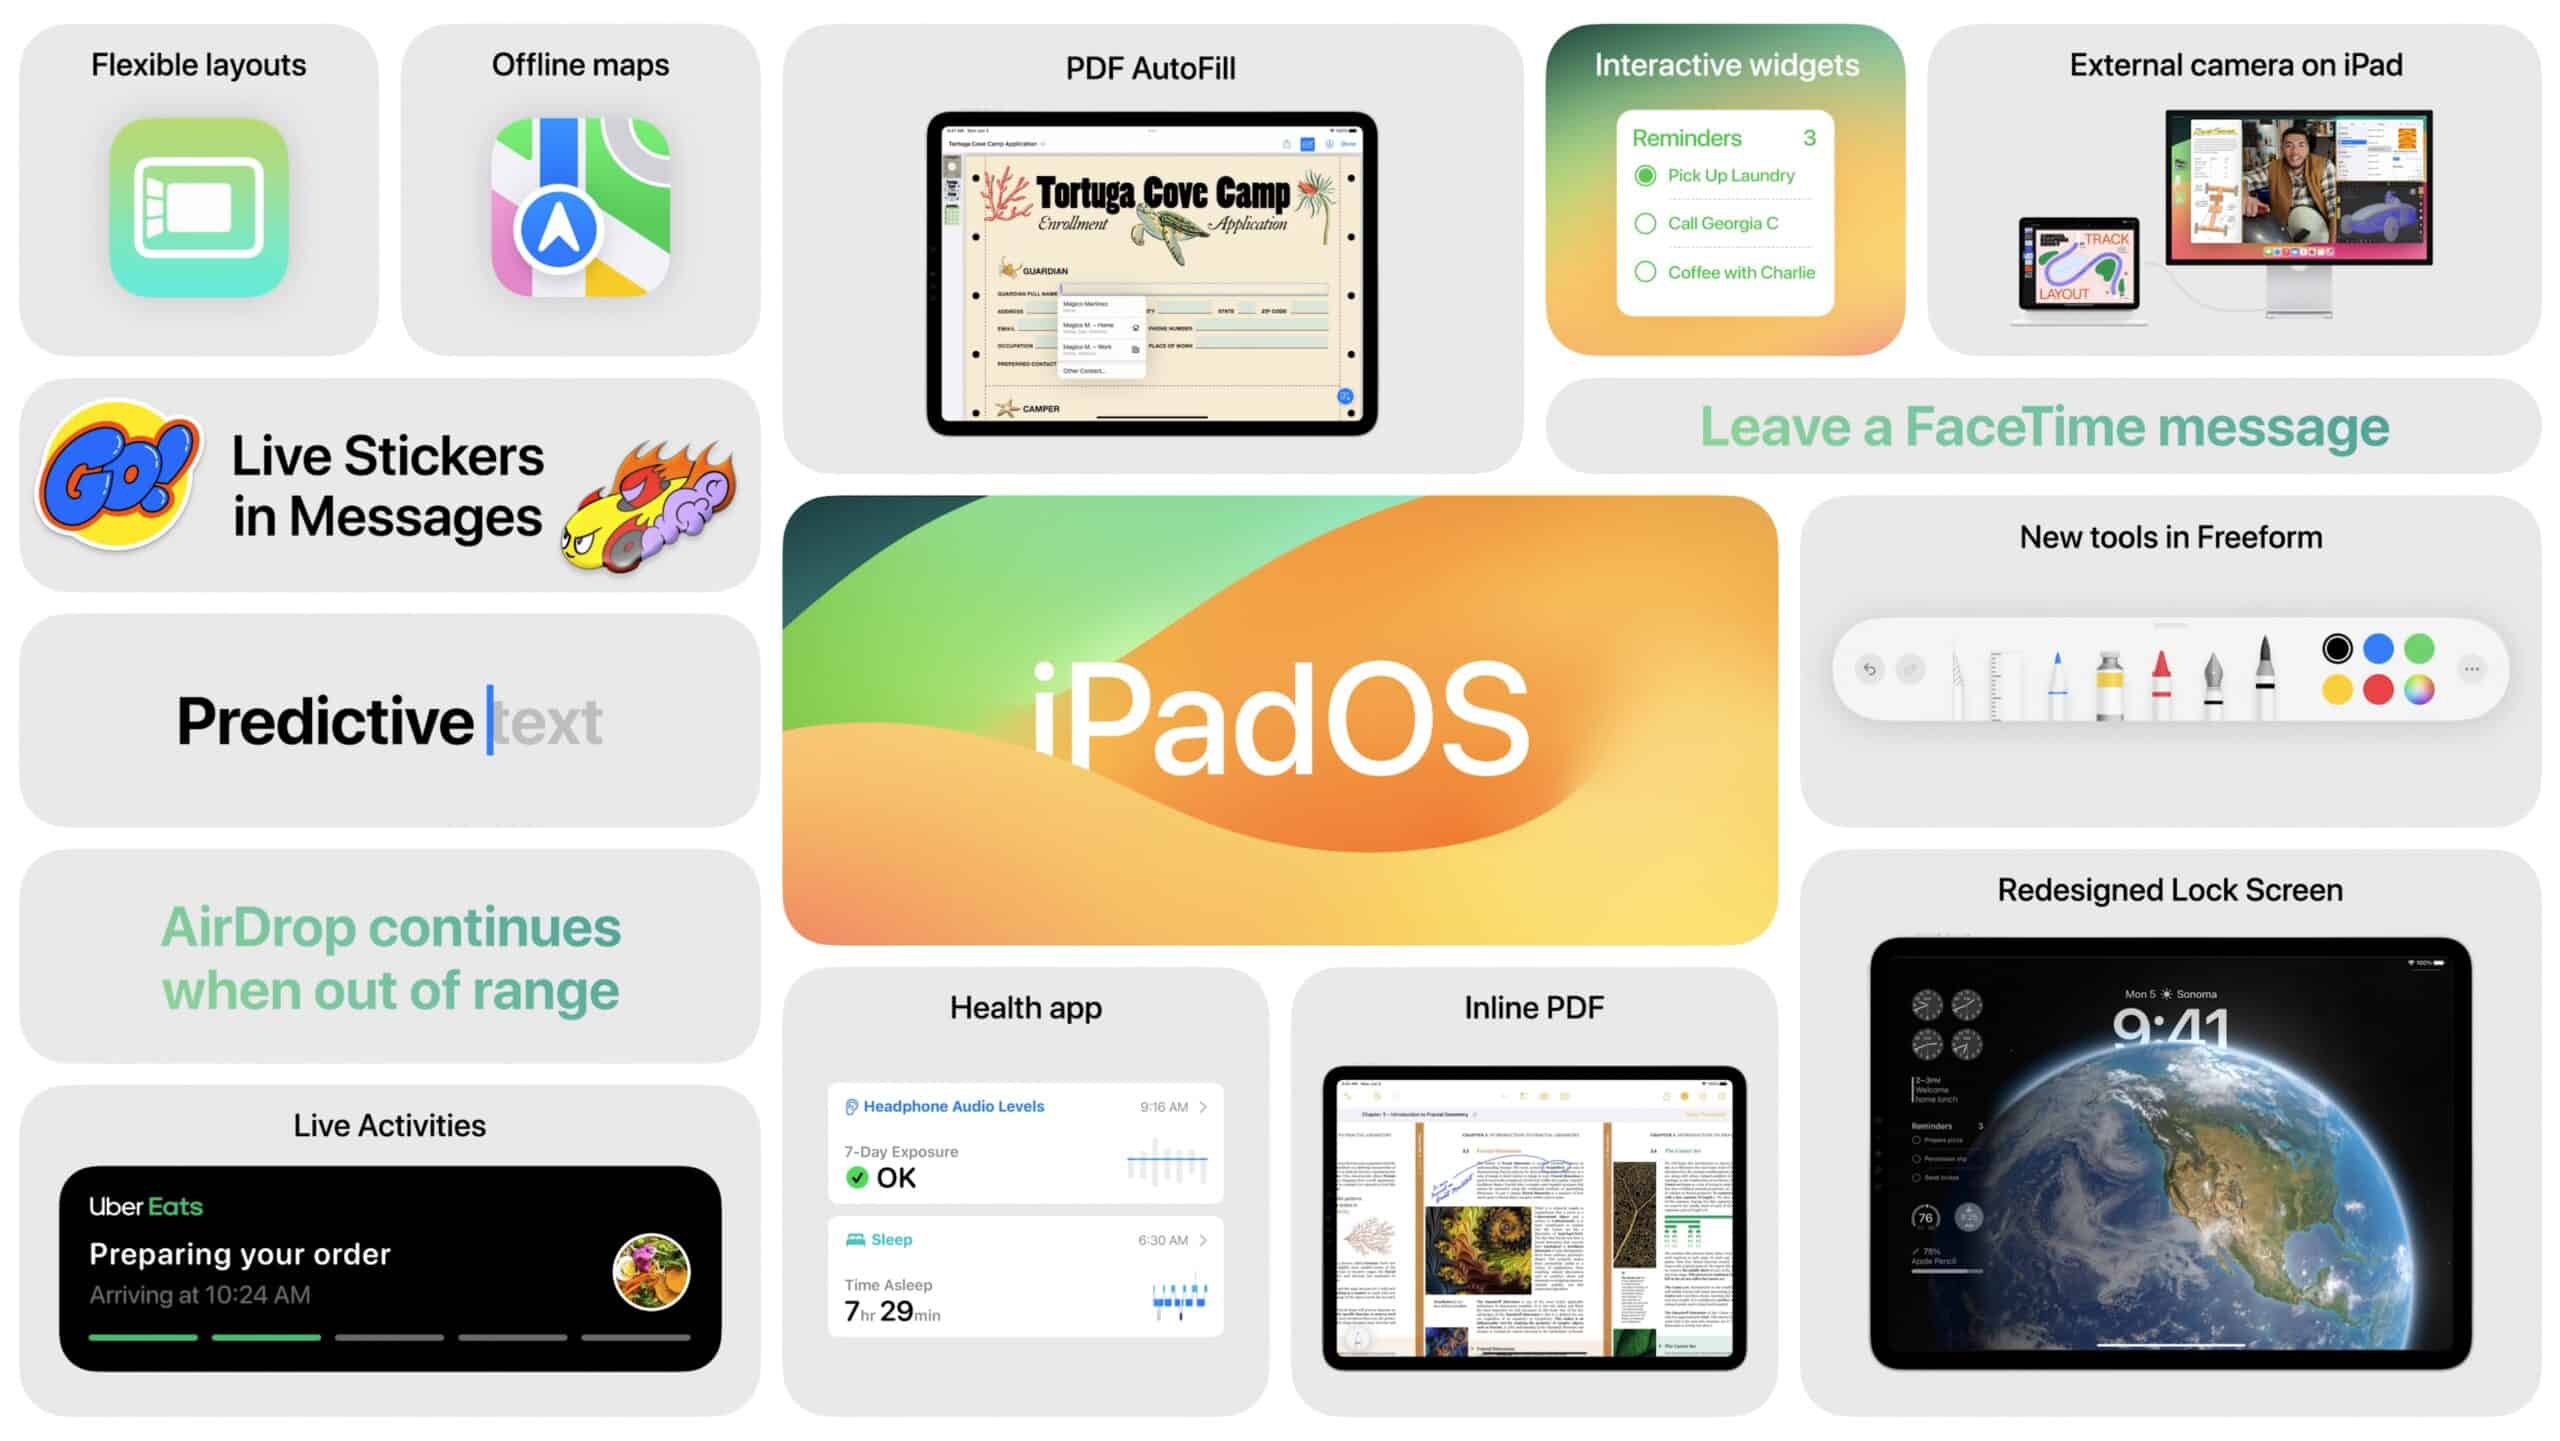 Apple's slide at WWDC 2023 showing iPadOS 17 updates including flexible layouts, Live Stickers in Messages, predictive text, interactive widgets, customizable lock screens, and other user experience and productivity enhancements.